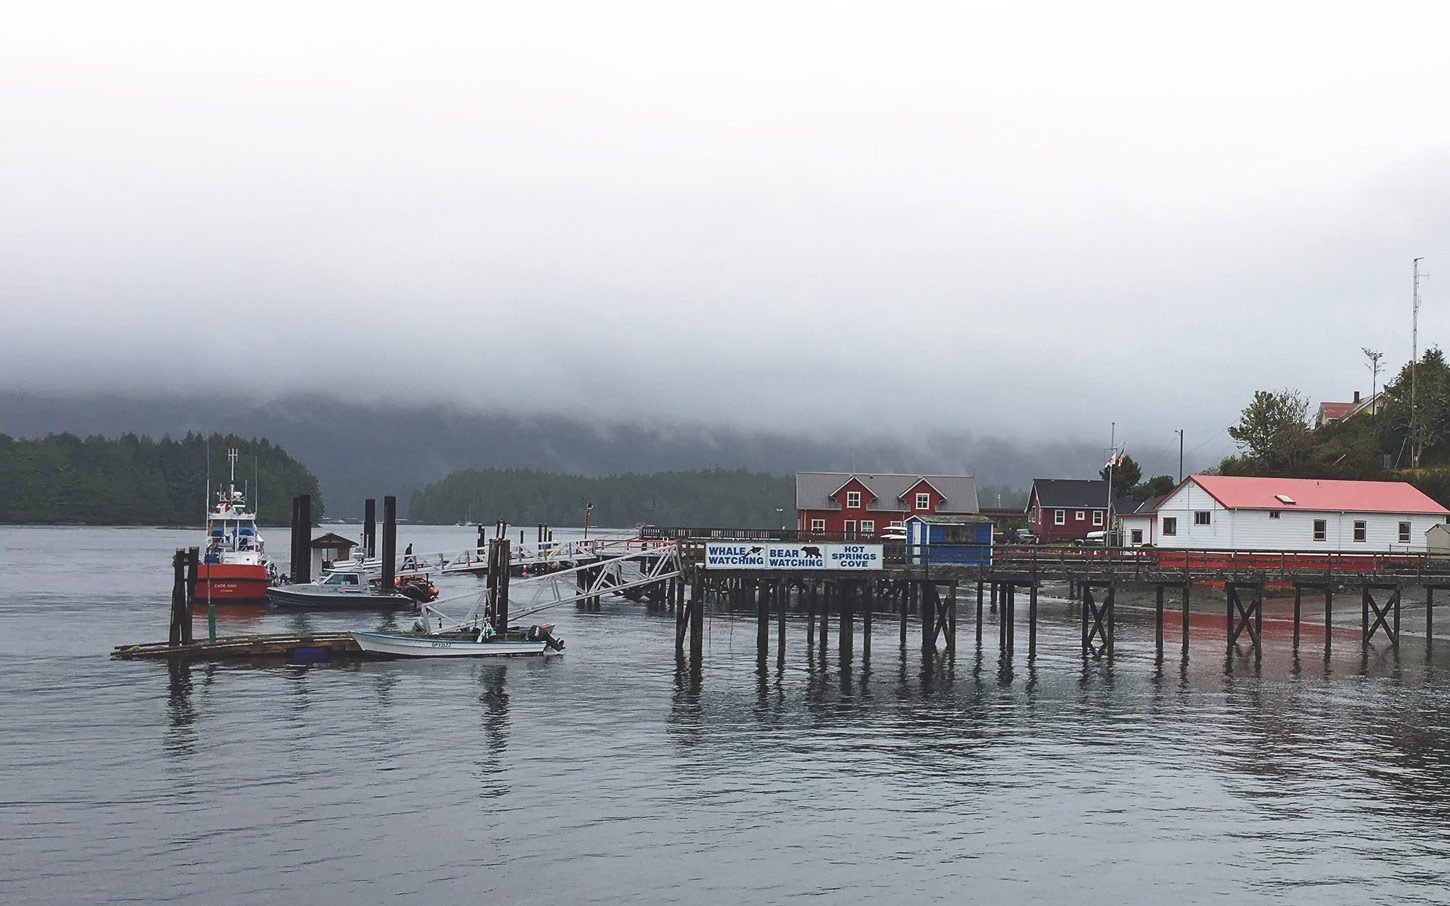 A shot of the Tofino harbour